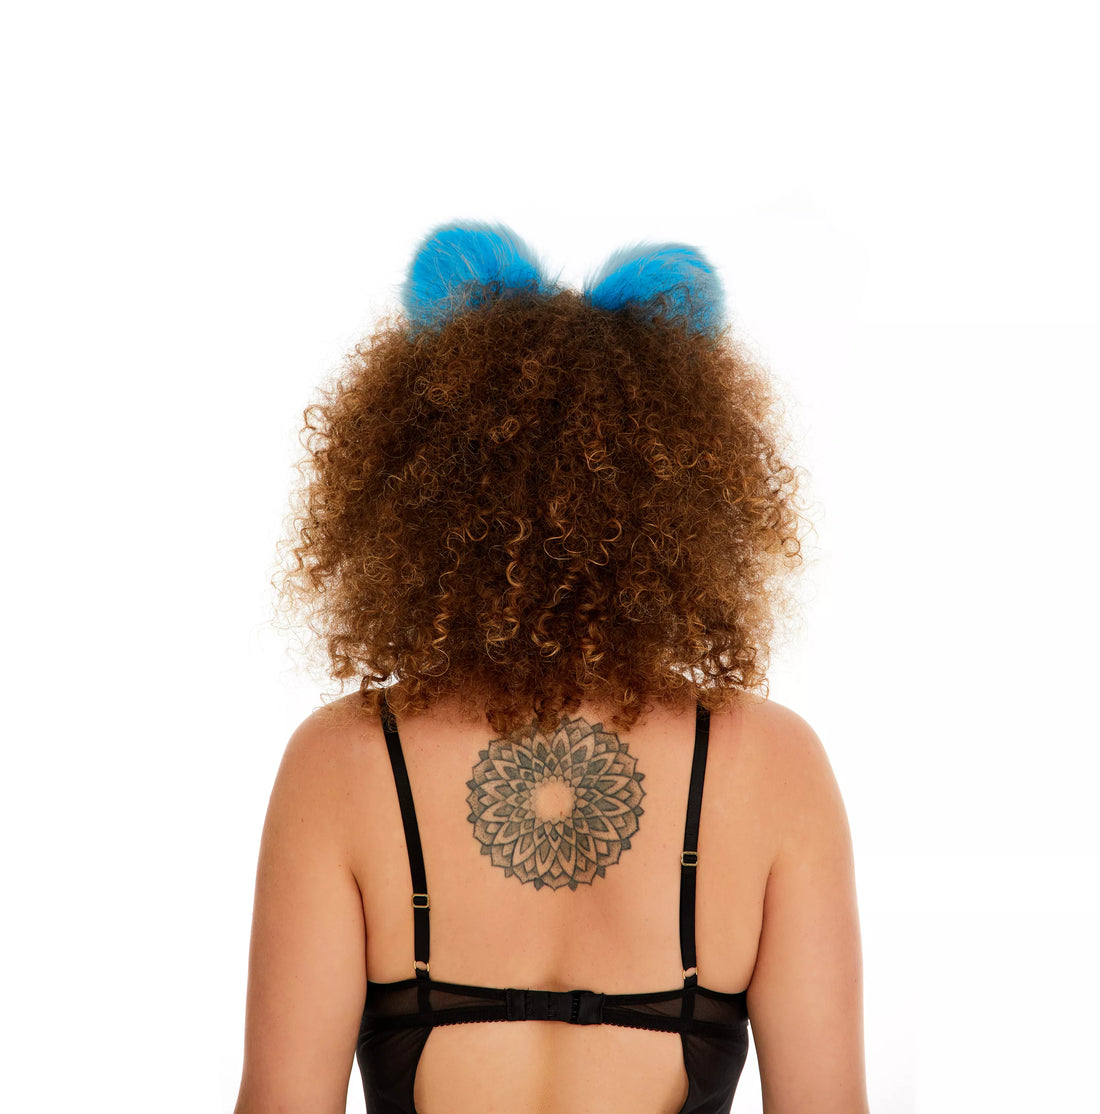 Cat ears bright blue with white tip and white ribbons